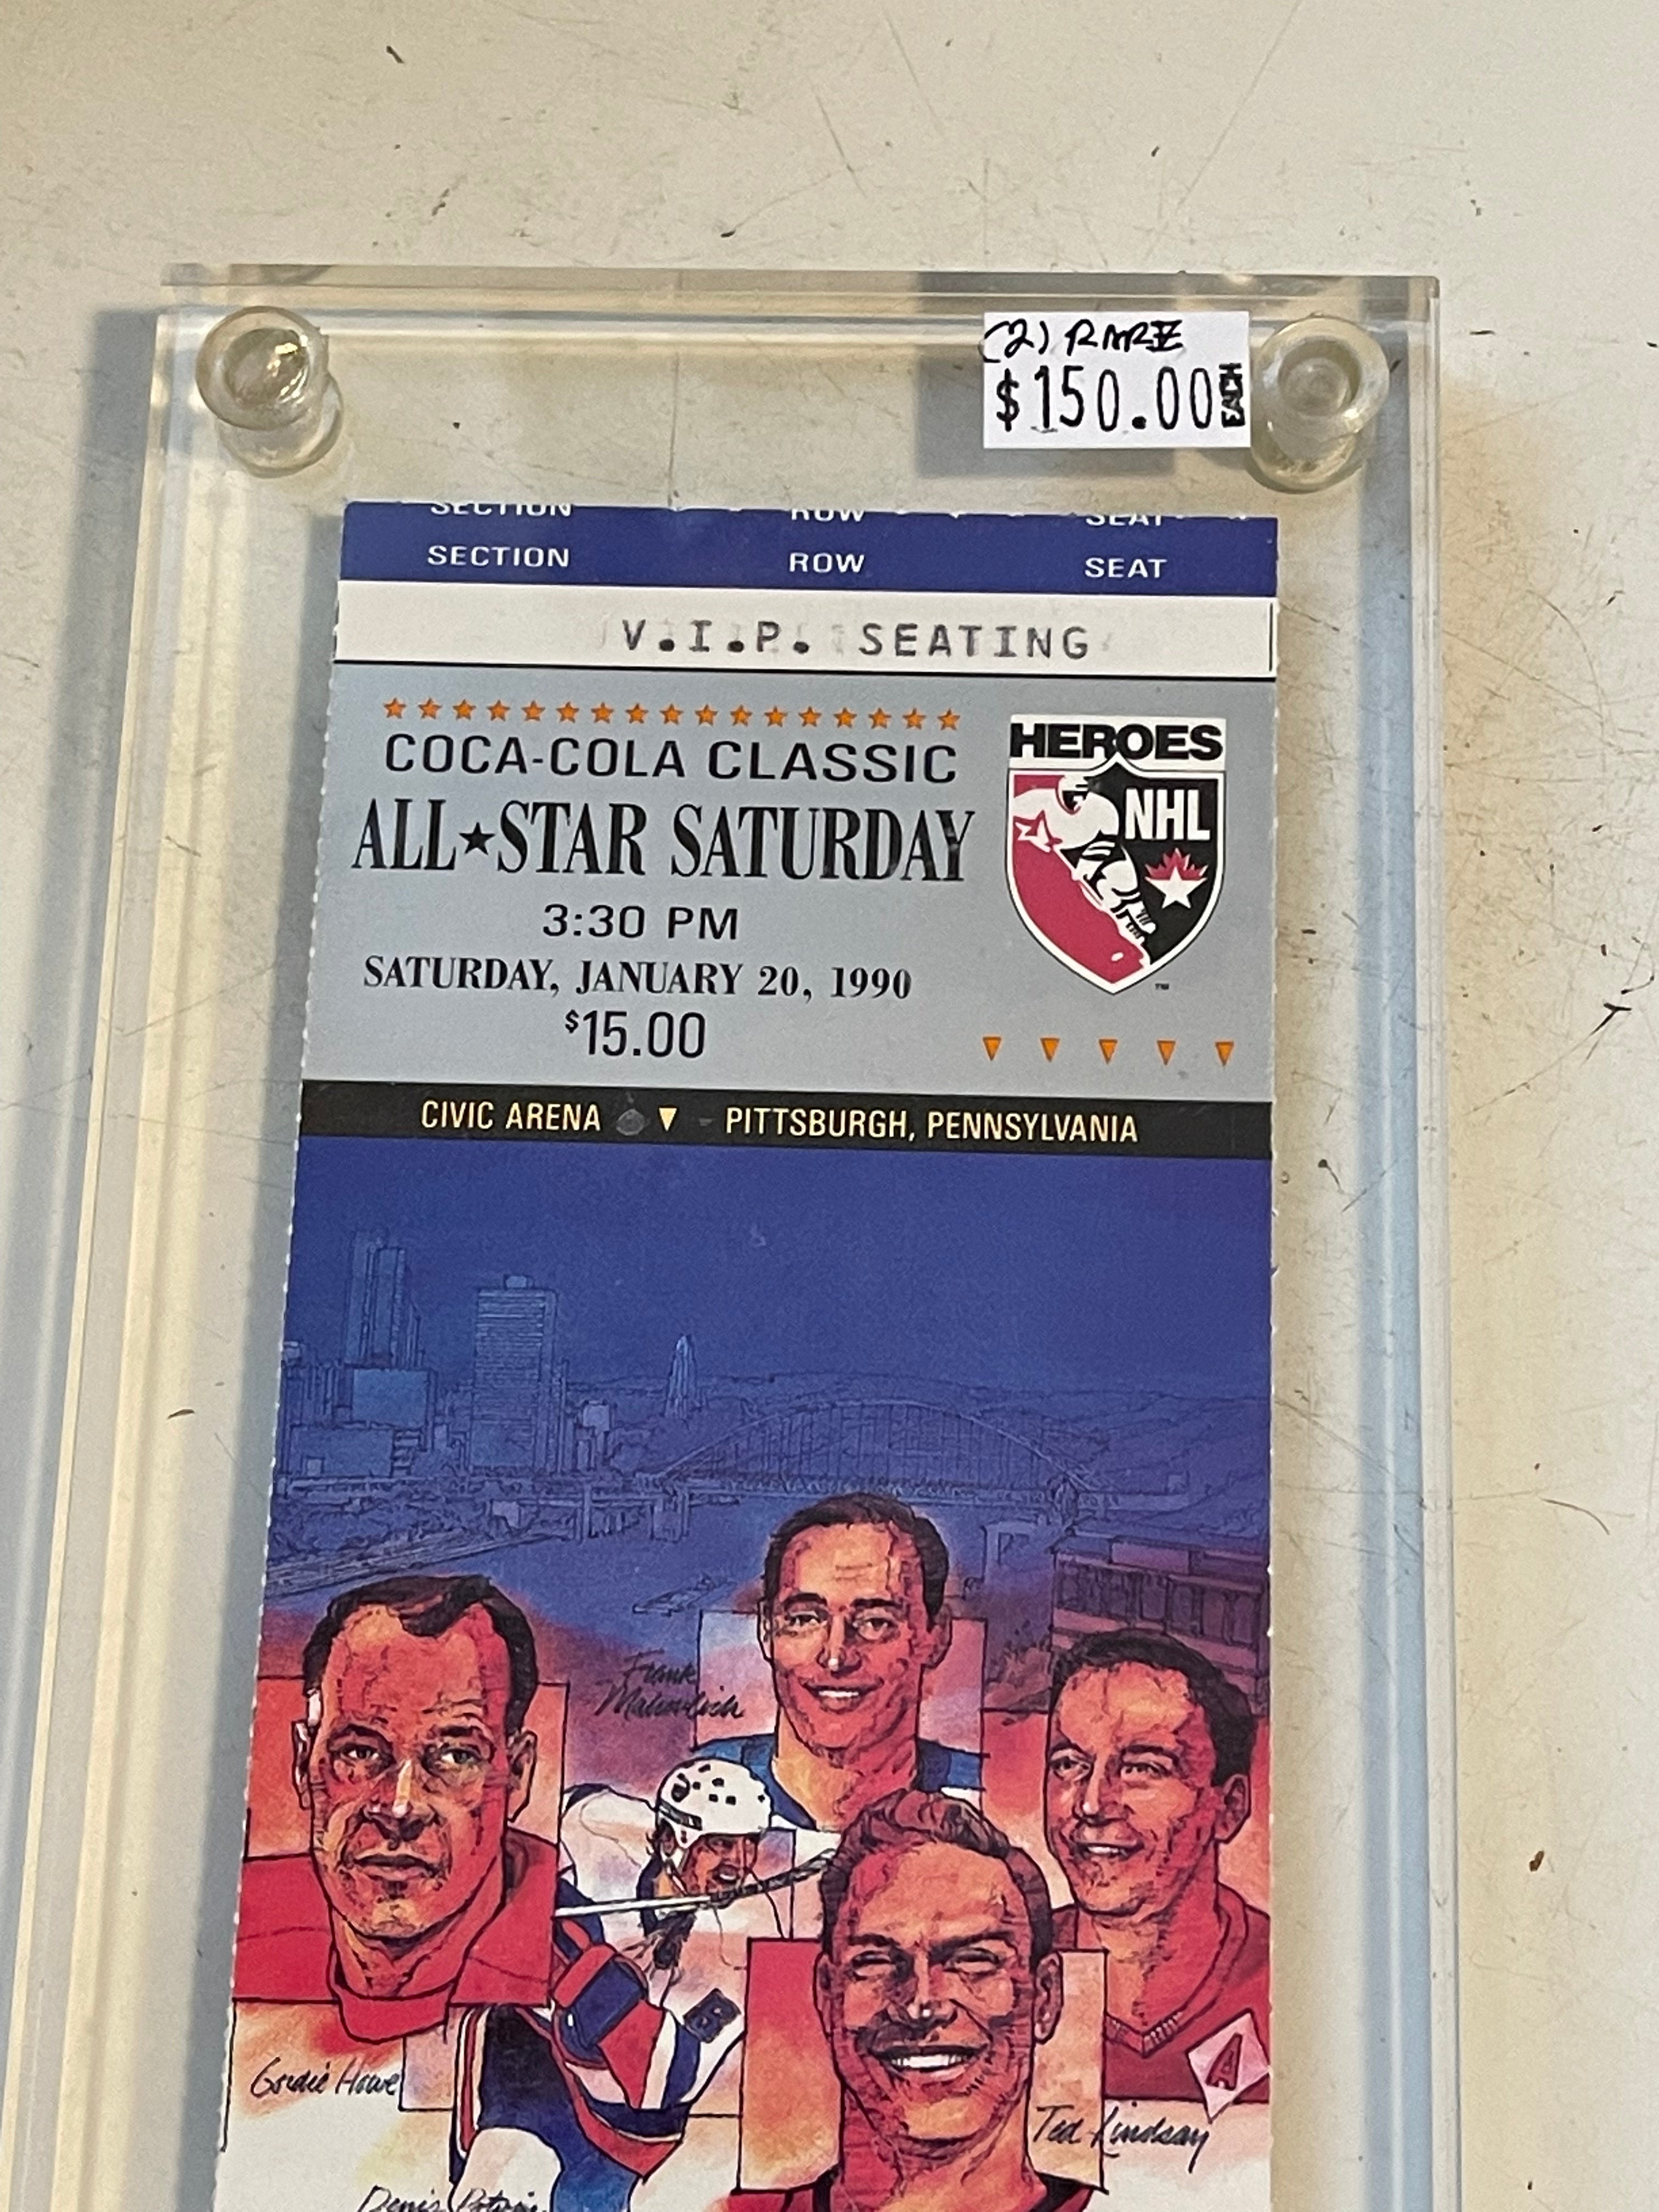 NHL hockey All-Star games two rare tickets in lucite holder 1990